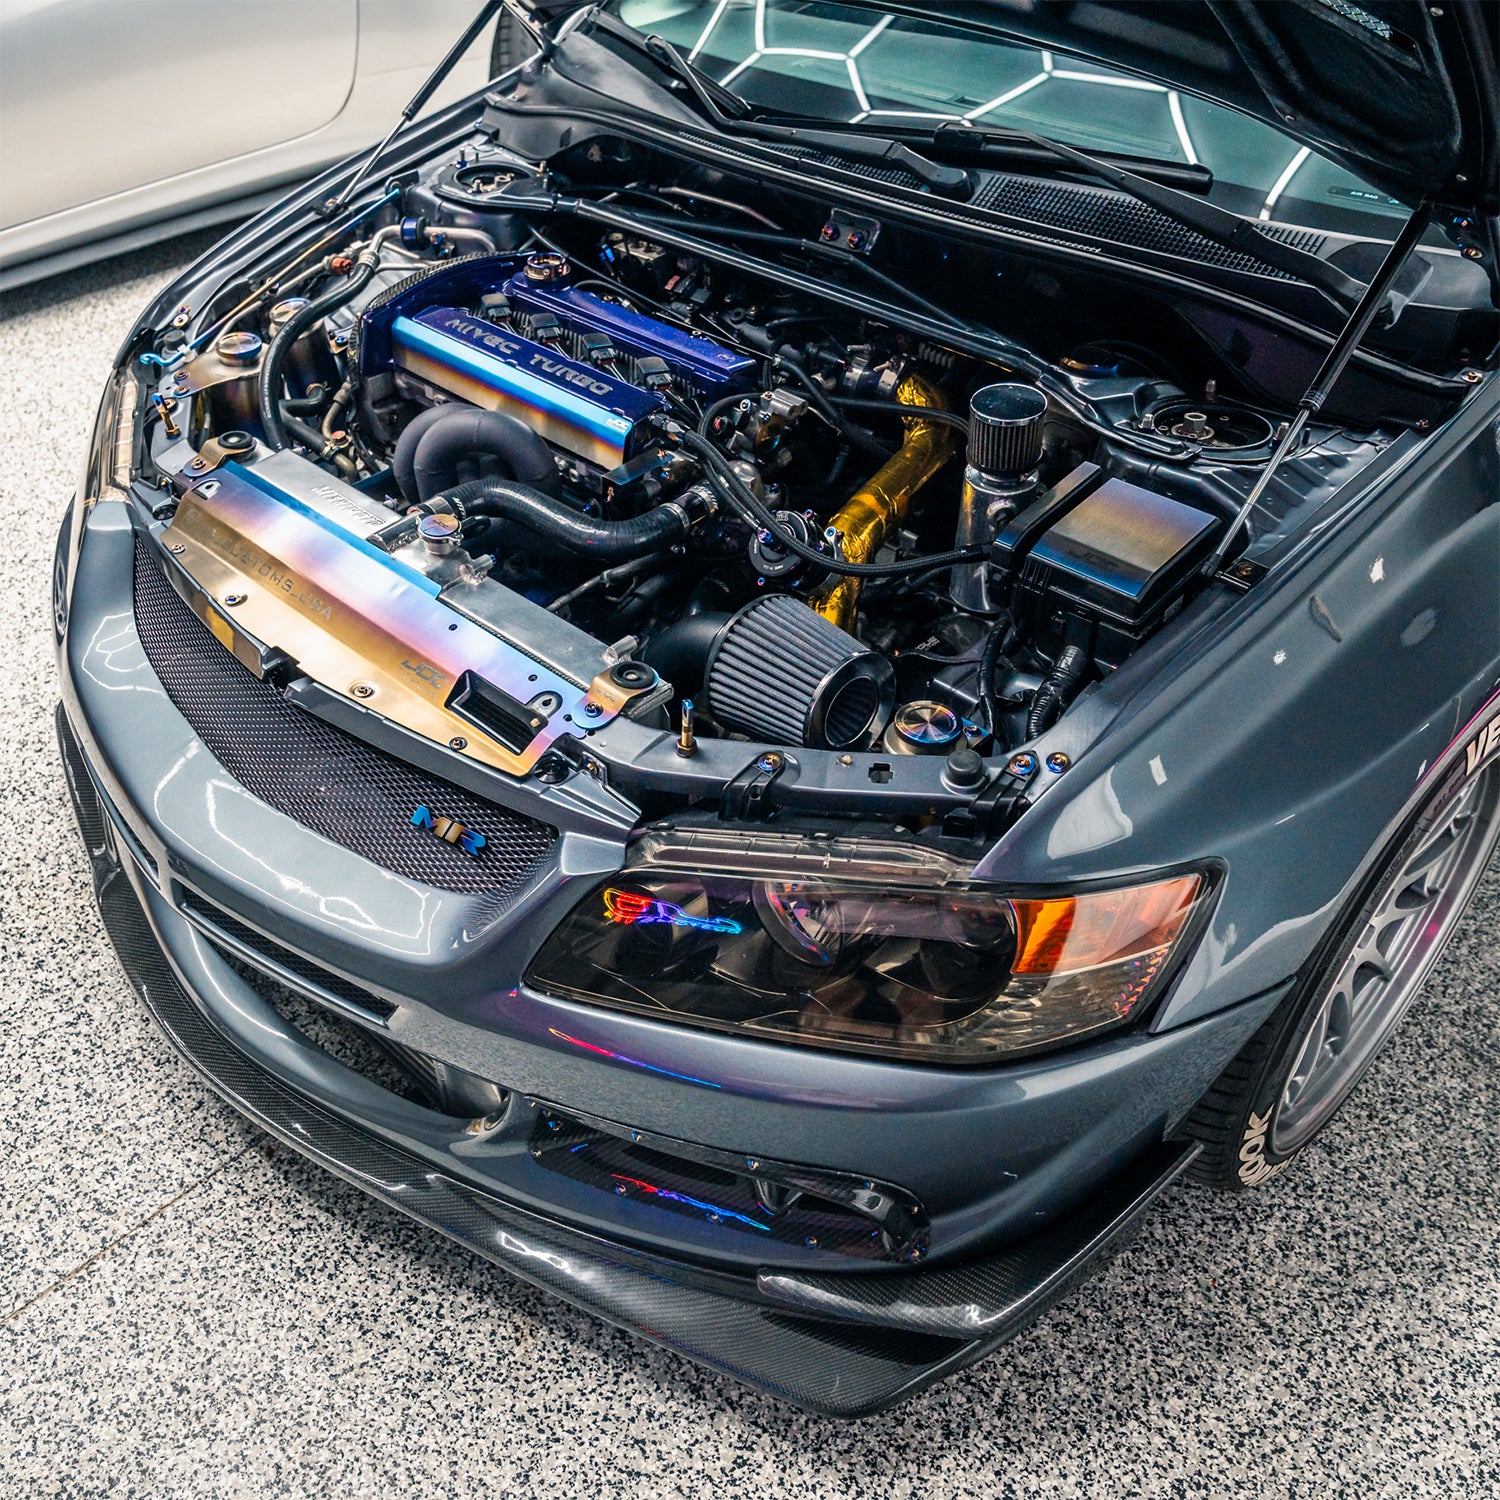 Ultimate Guide to Upgrading Your Mitsubishi Evo 8/9's Appearance